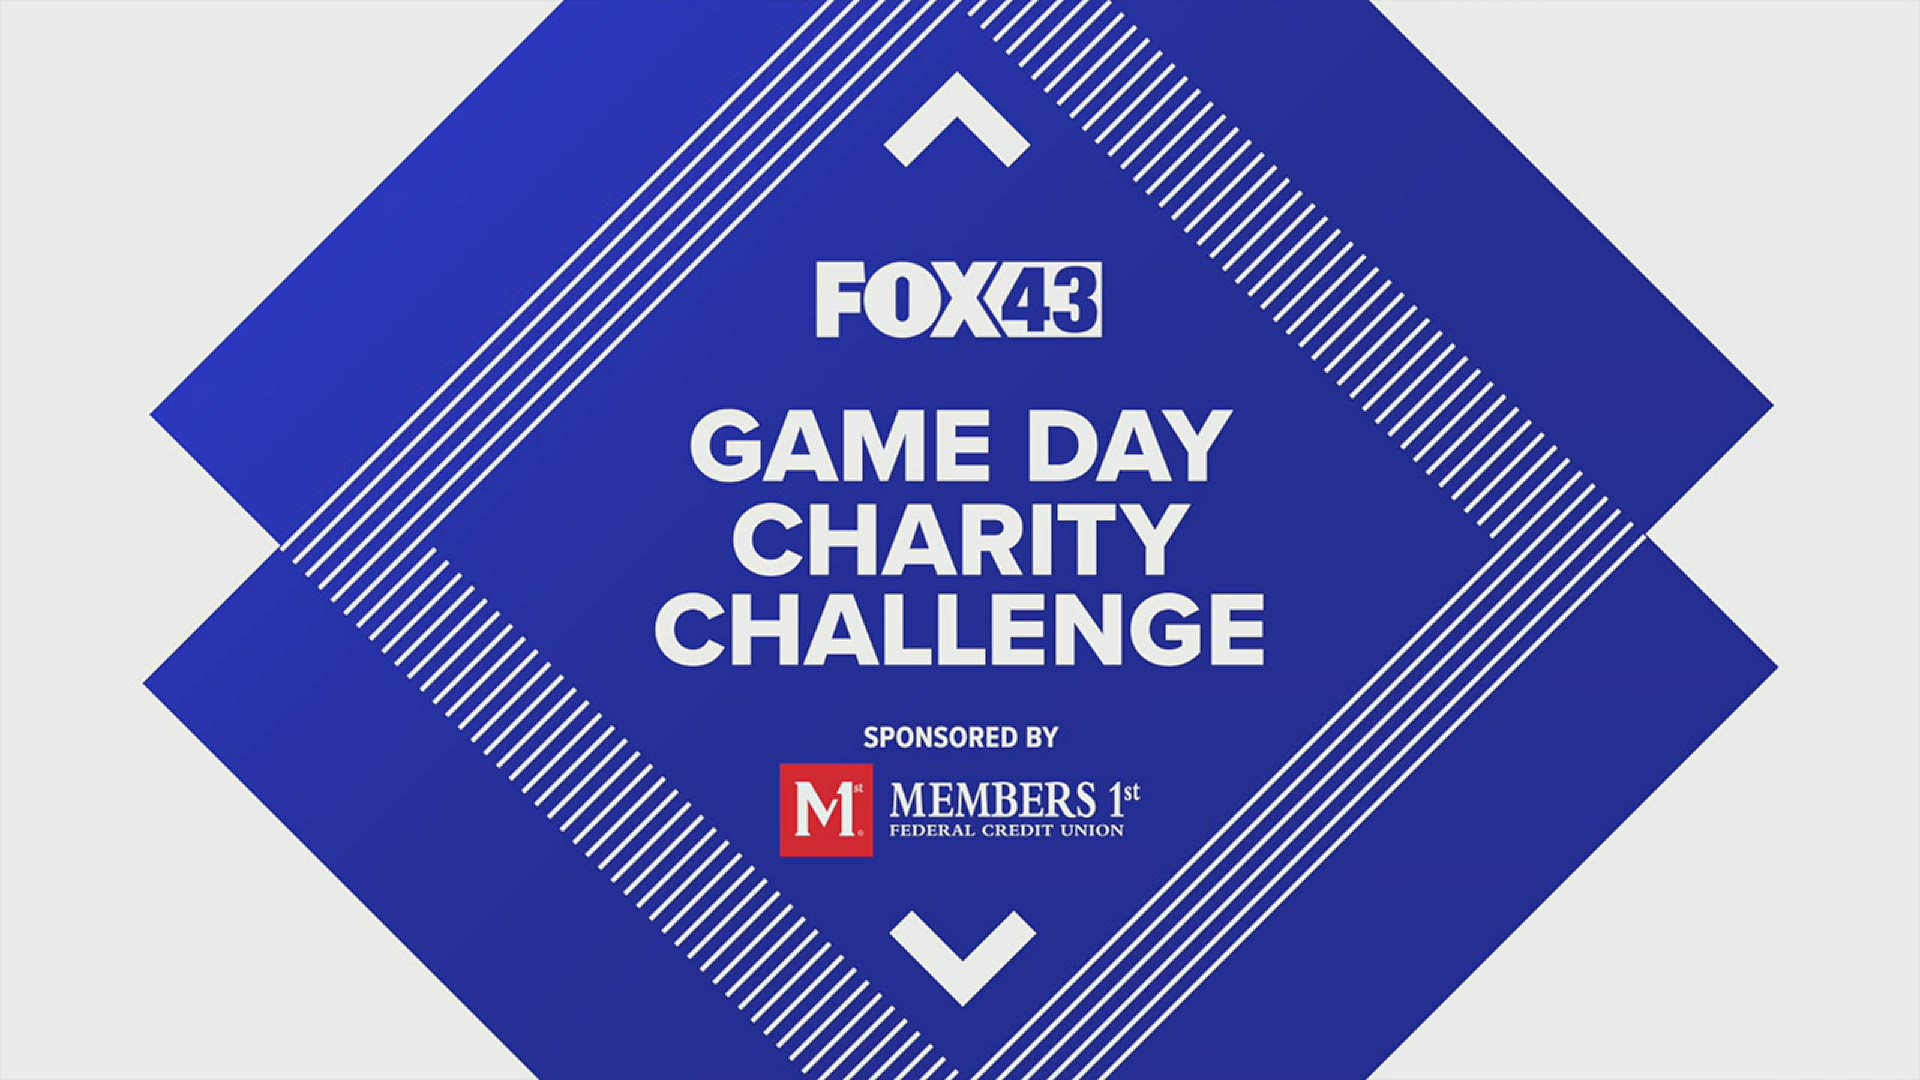 Every Thursday from here on out, Todd and Mike will pick the winners of the NFL games shown on FOX this week. The winner will have money donated to charity.